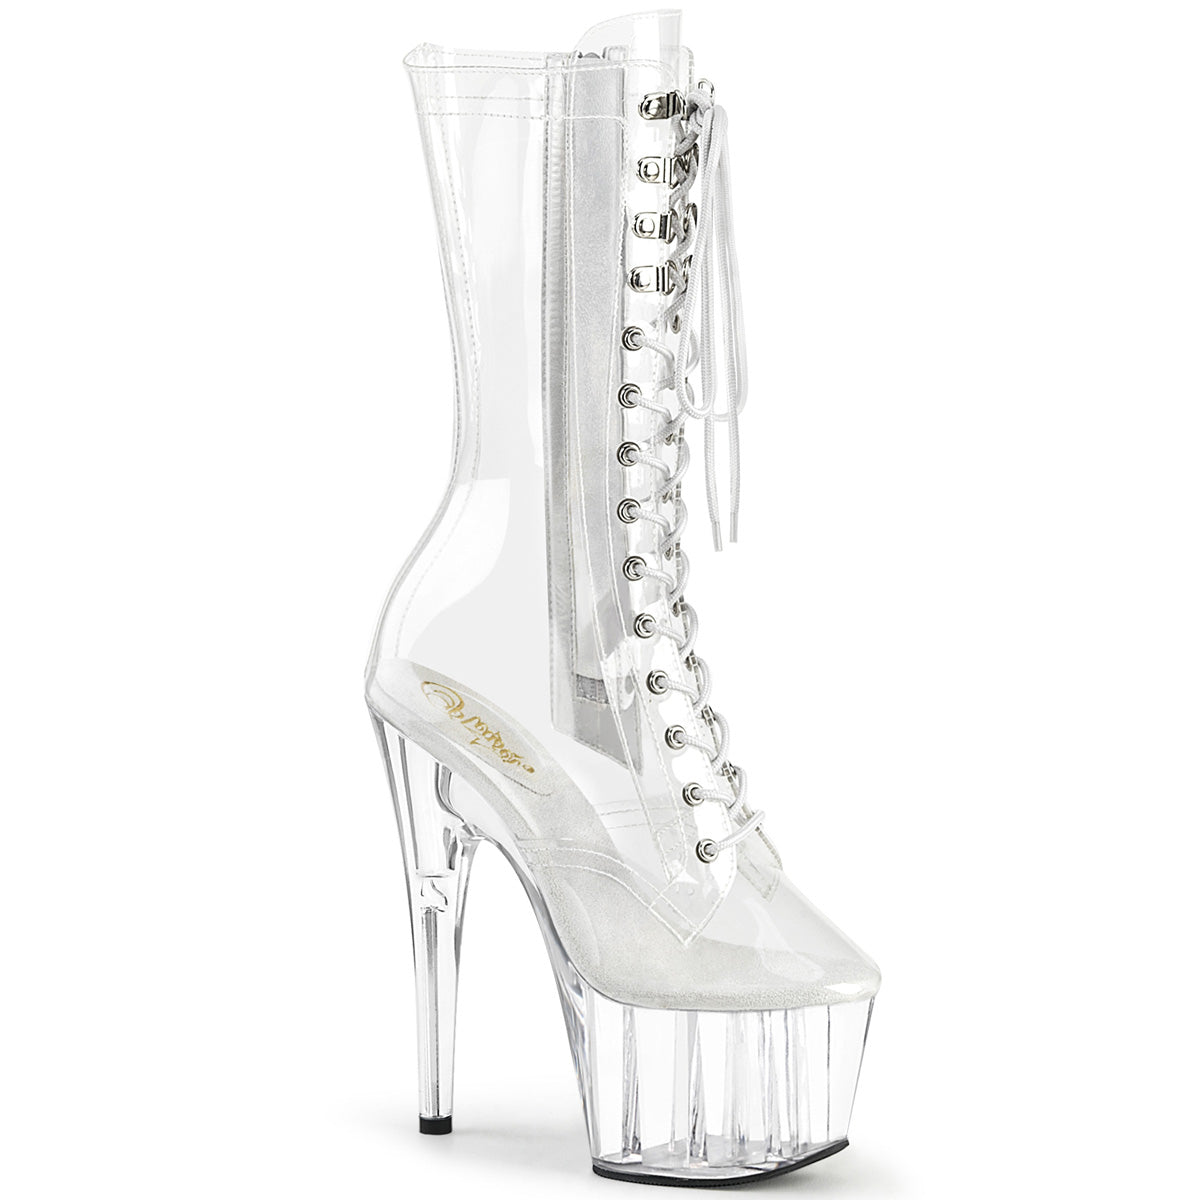 Pleaser ADORE-1050C Clear 7 Inch (178mm) Heel. 2 3/4 Inch (70mm) Platform Lace-Up Front Mid Calf Boot, Inside Zip Closure